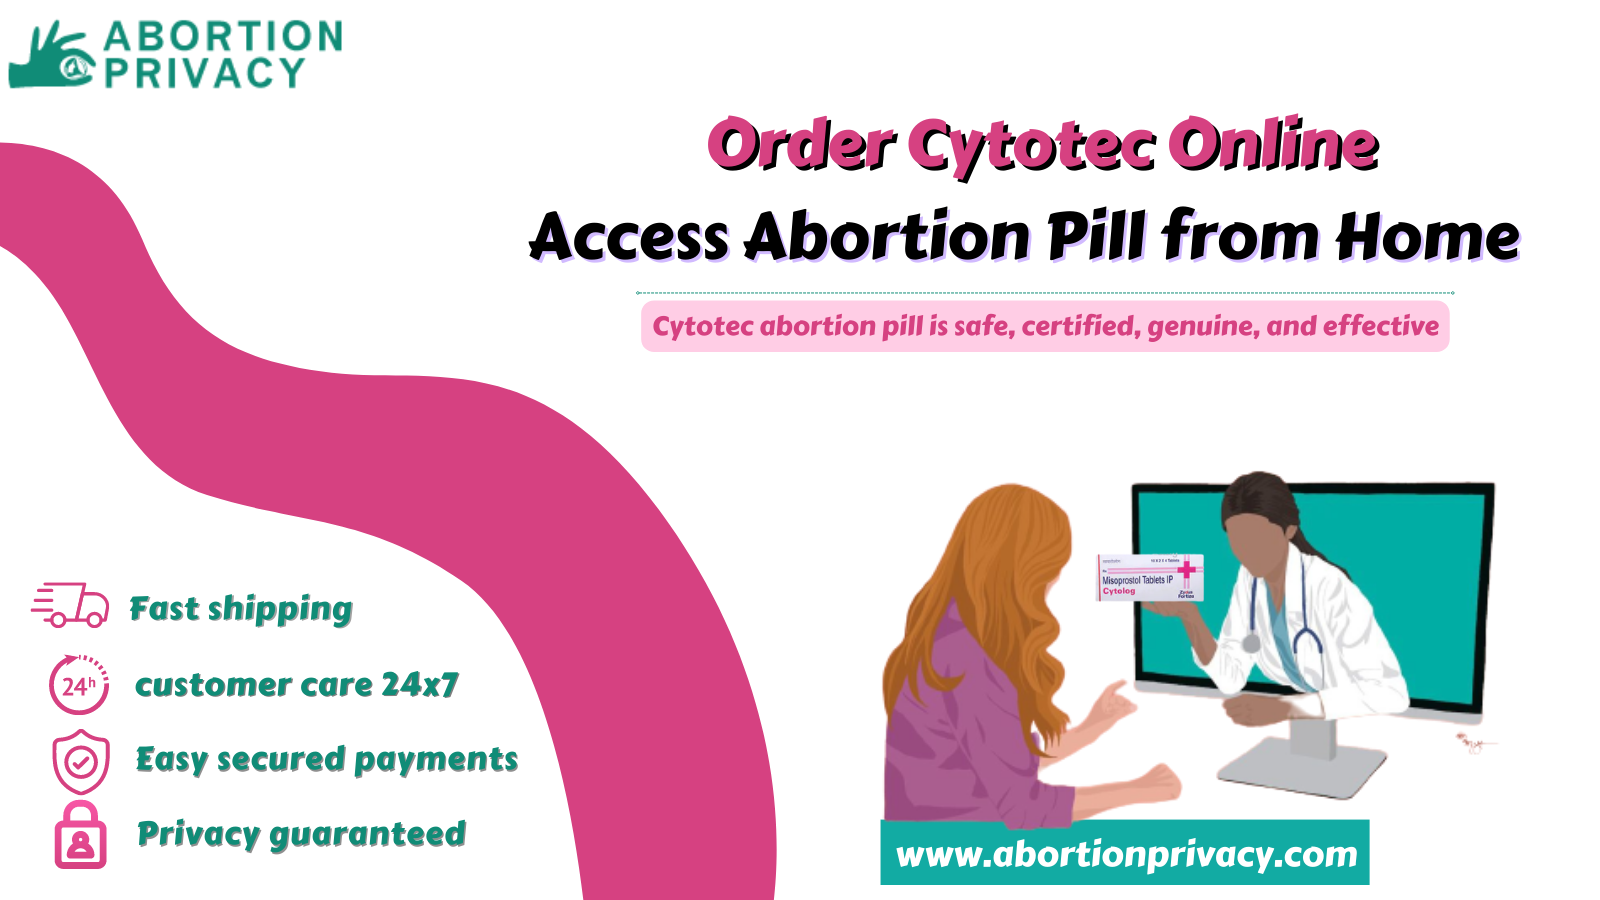 Order Cytotec Online Access Abortion Pill from Home